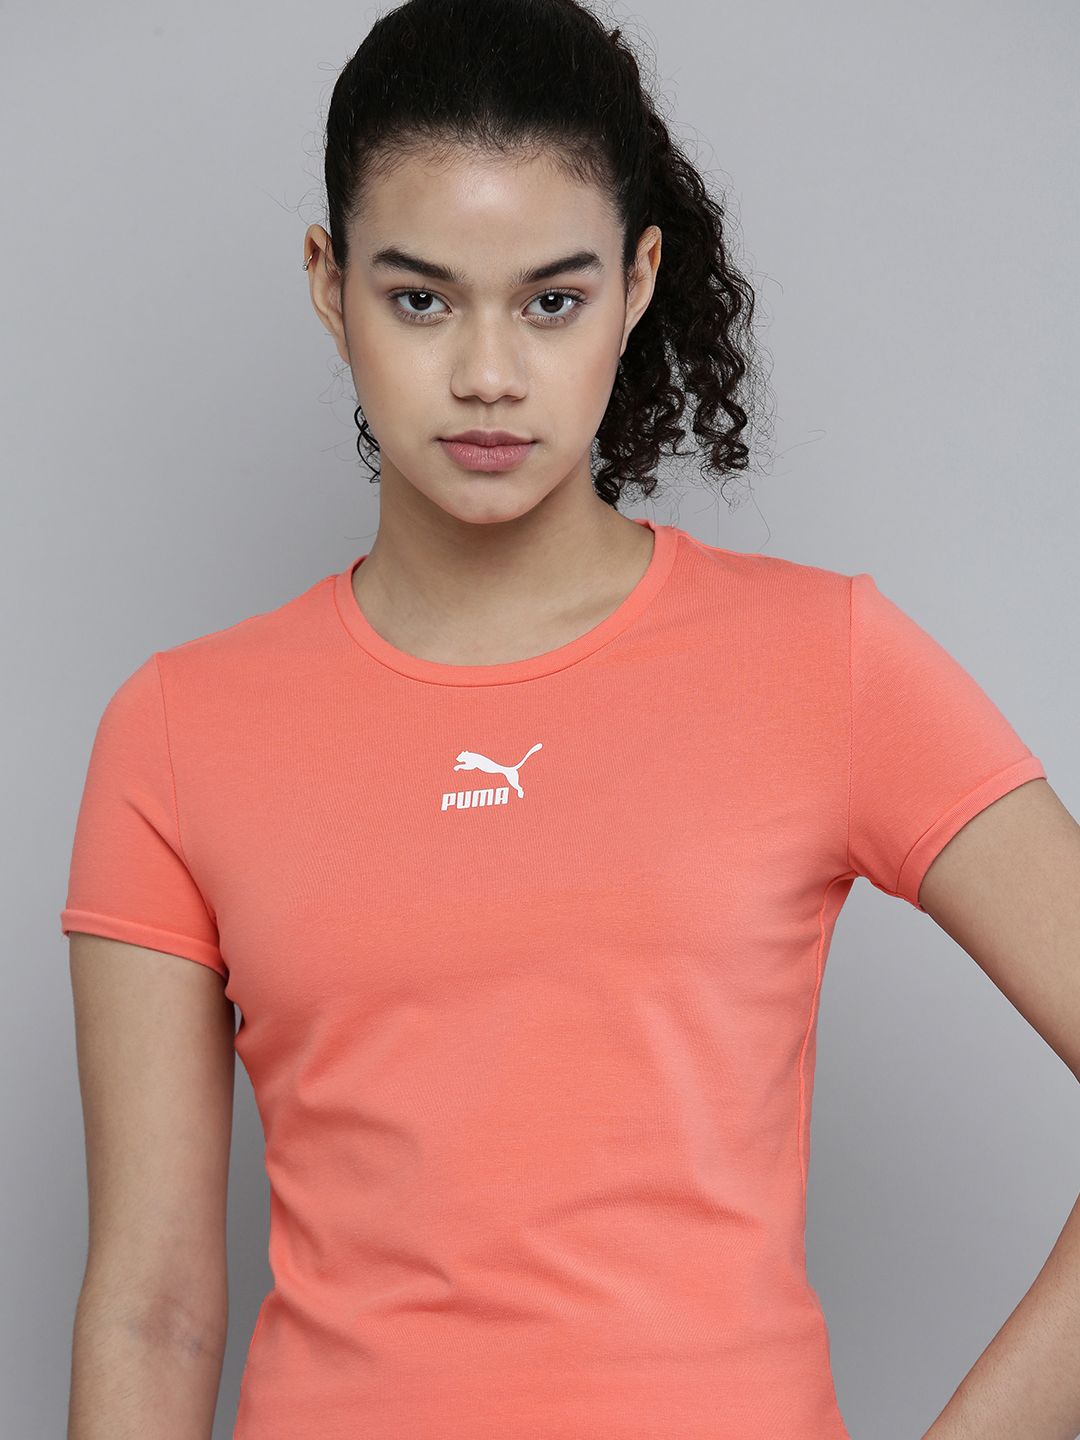 Puma Women Peach-Coloured Solid Classics Fitted Slim Fit Round Neck T-shirt Price in India